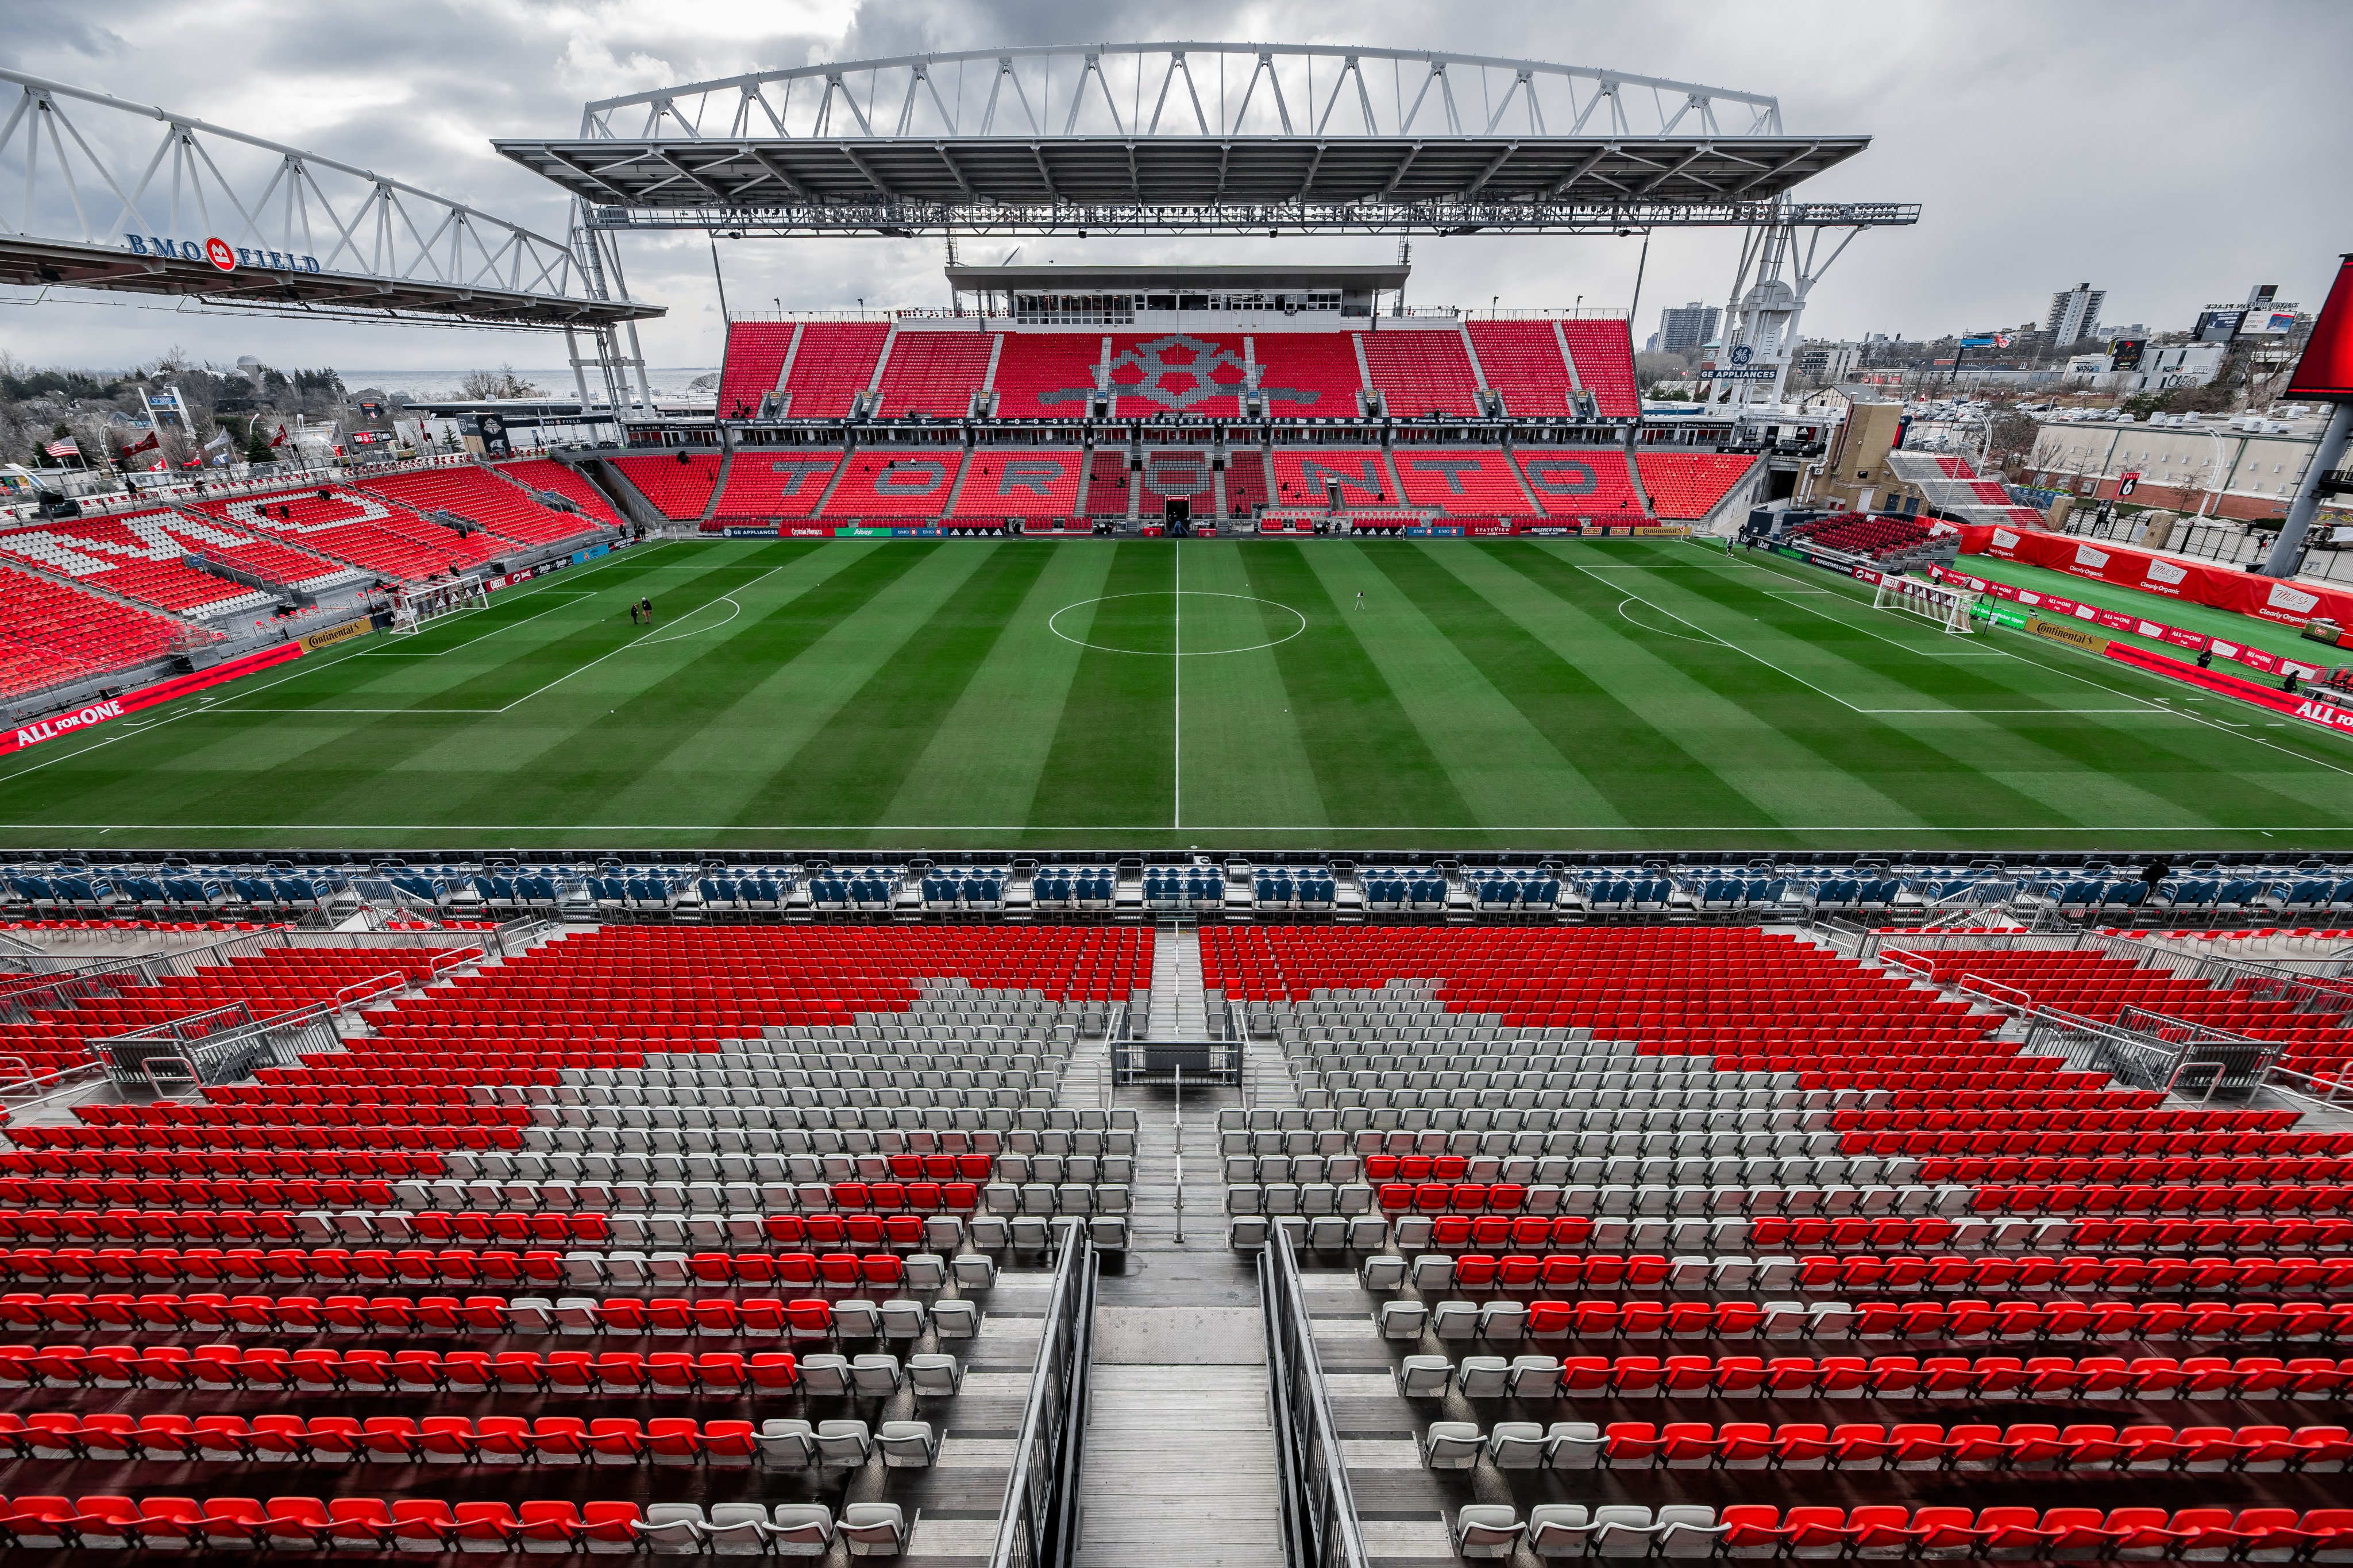 Toronto FC on X: Oh, you better WERK pitch 😍